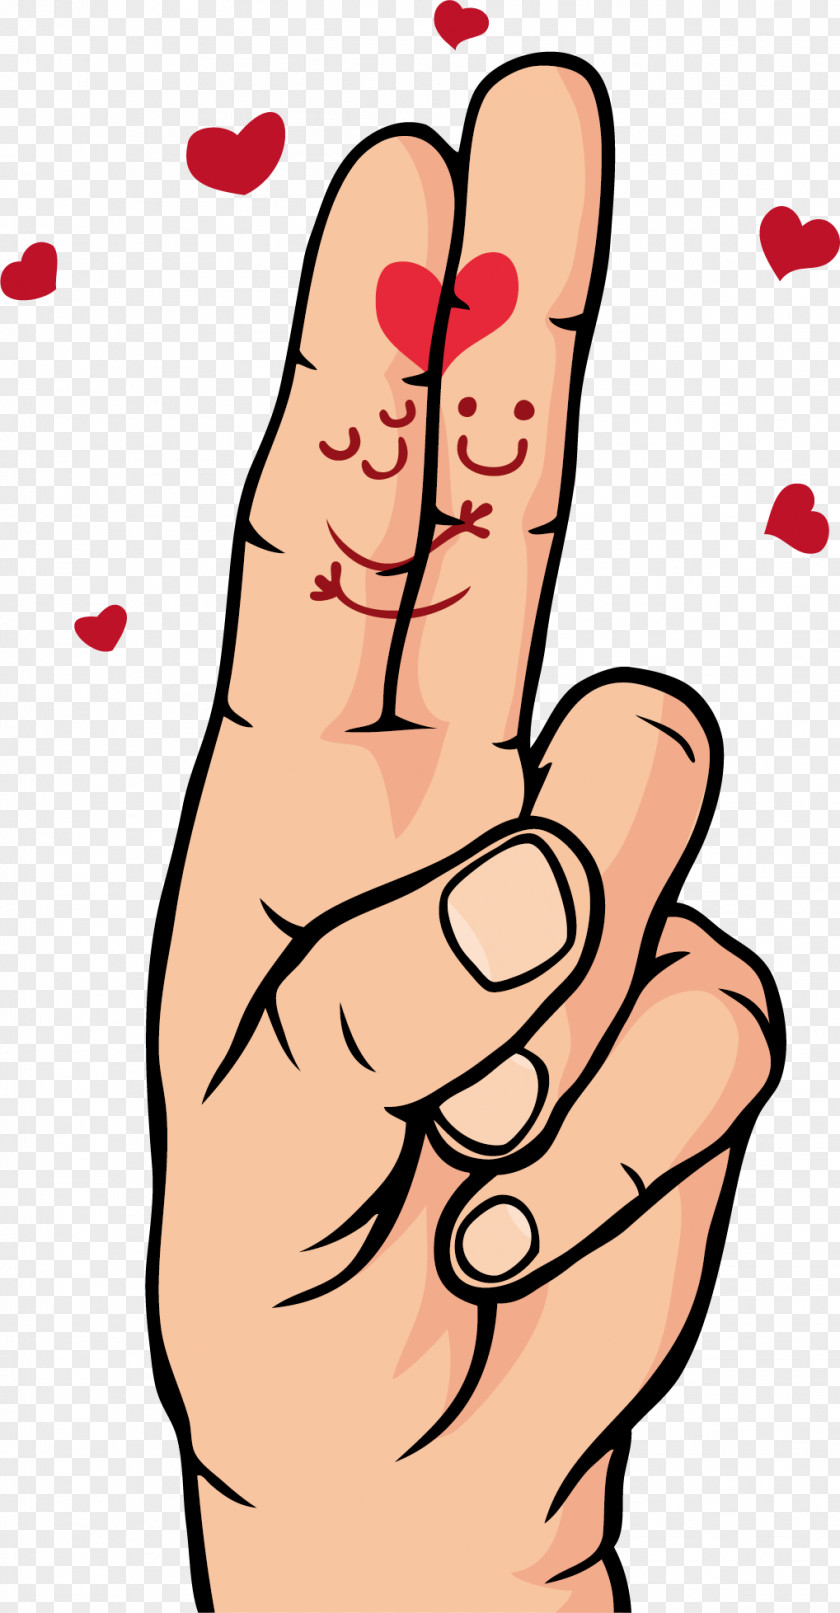 Fingers On The Love Thumb Heart Romance PNG